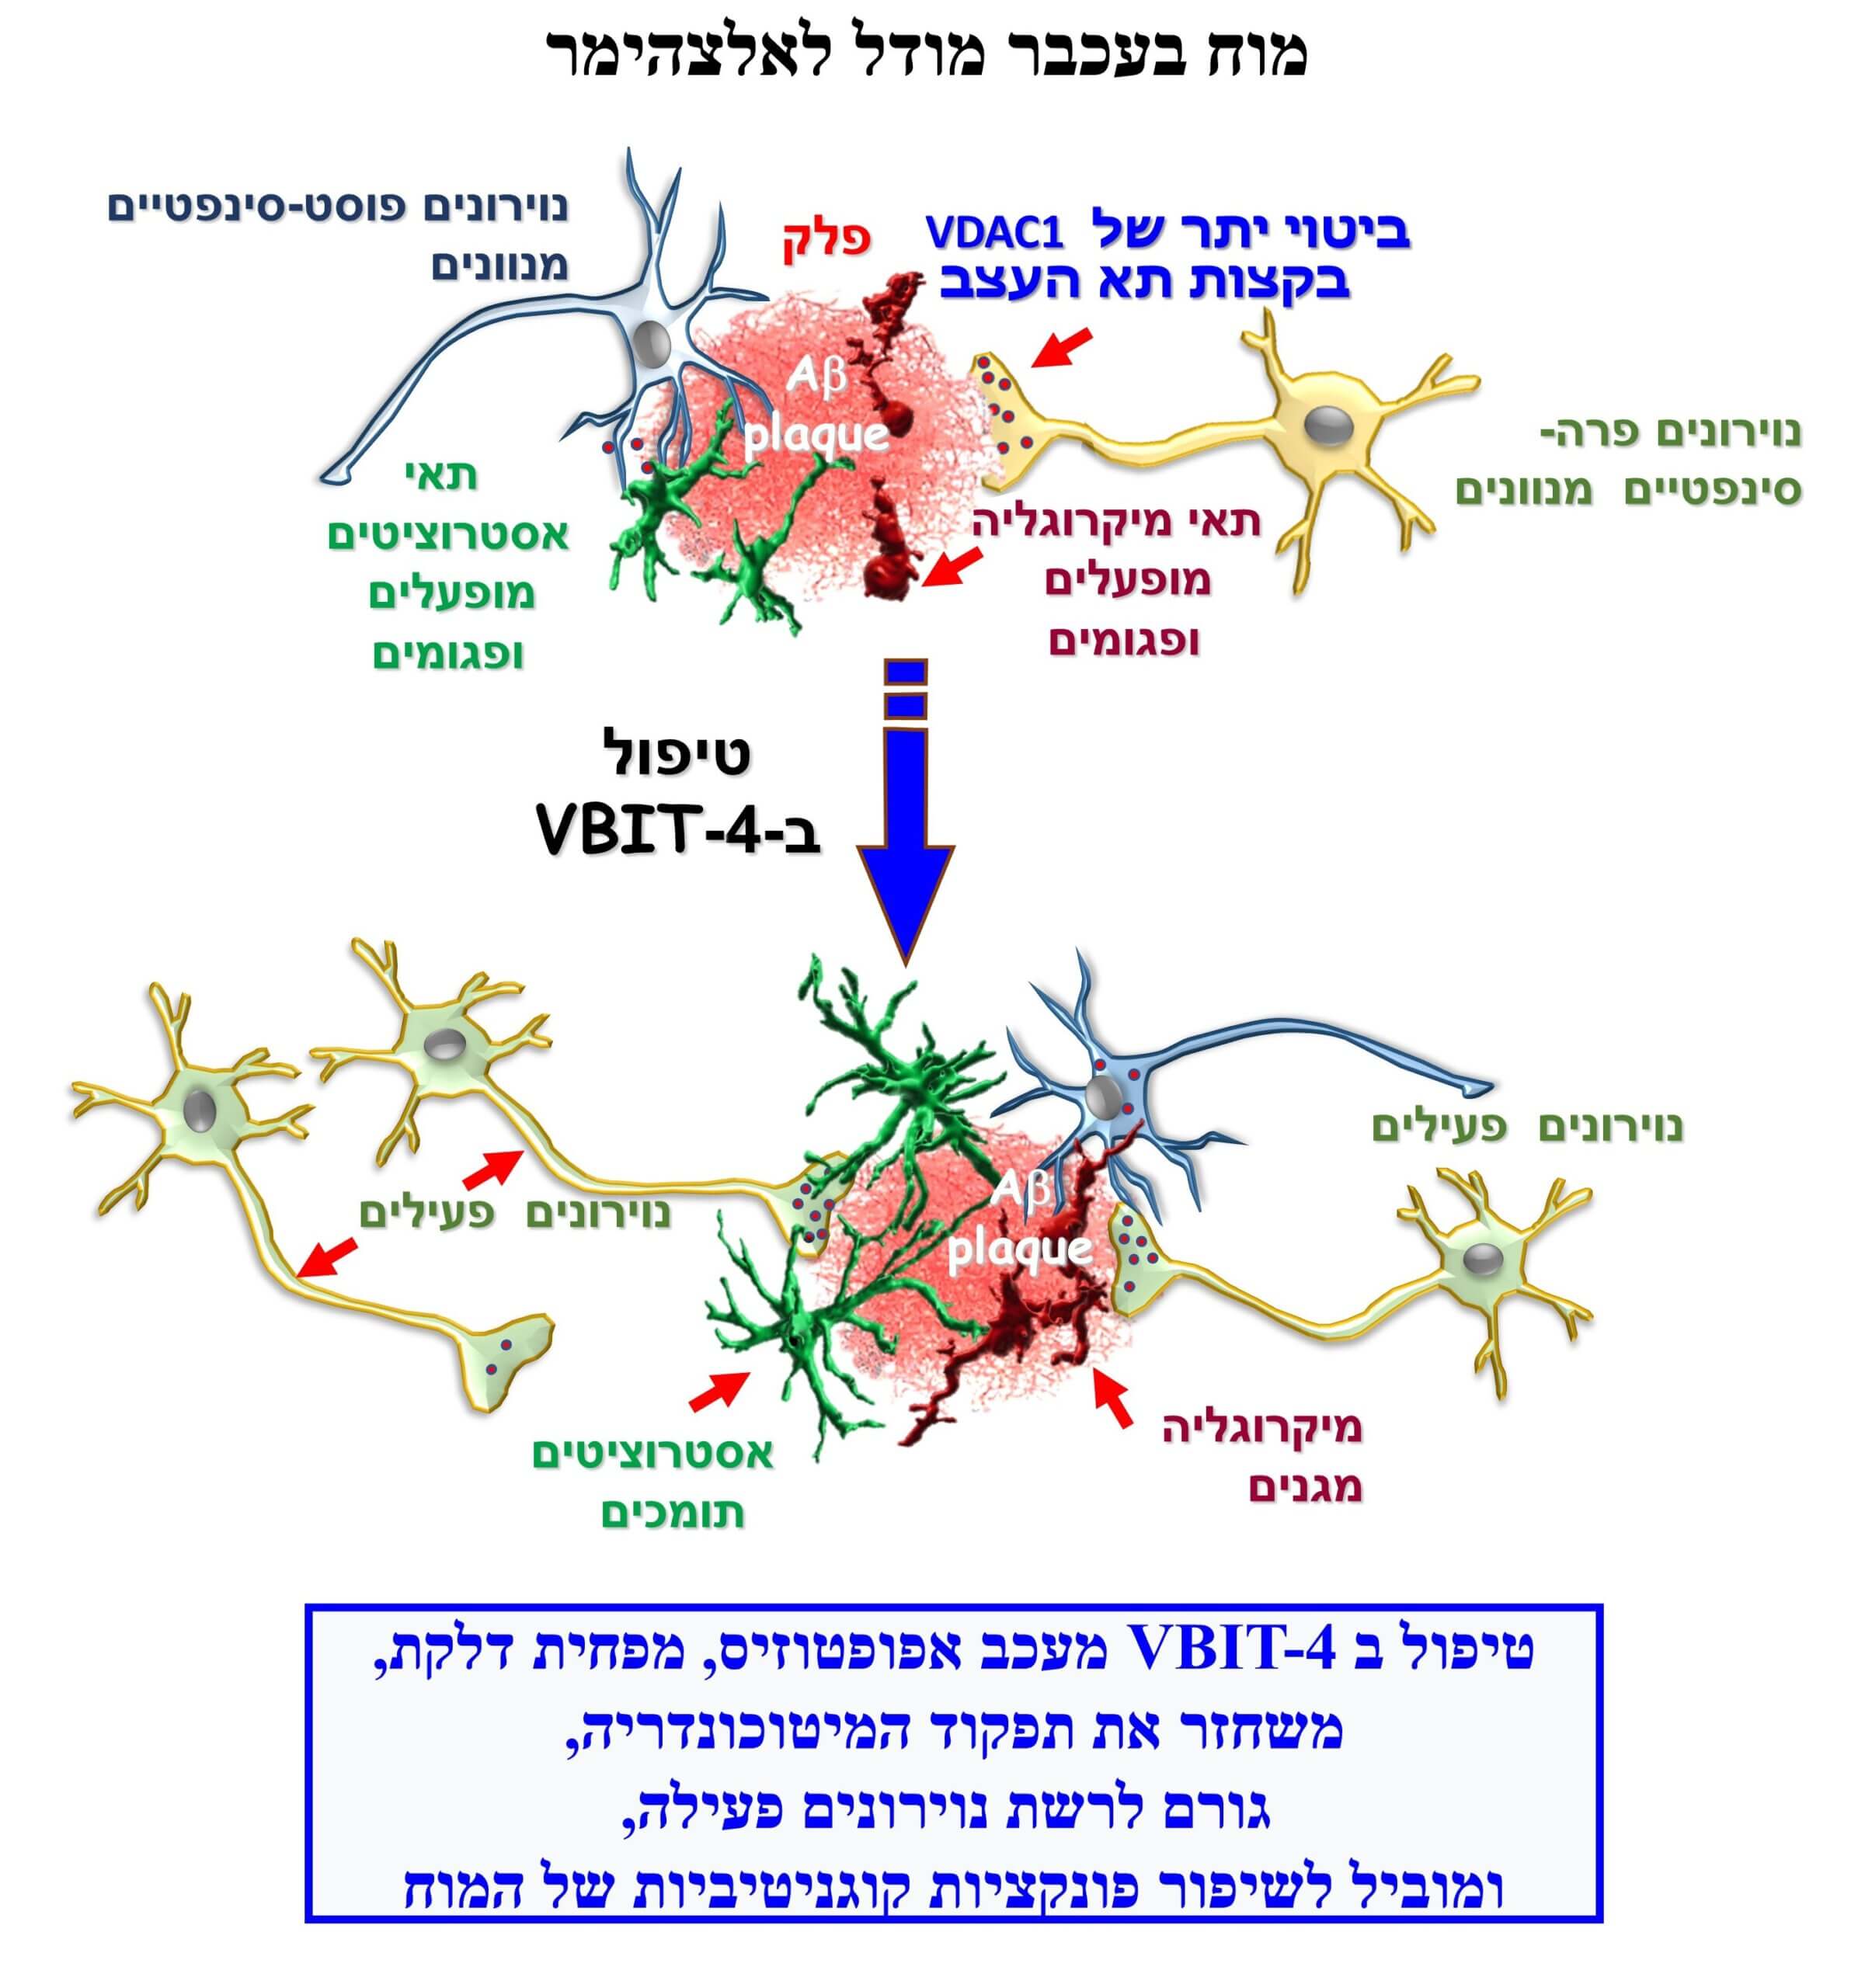 Link to the figure with a diagram showing the pathophysiological changes of Alzheimer's disease that the VBIT-4 molecule prevents by binding to the VDAC1 protein